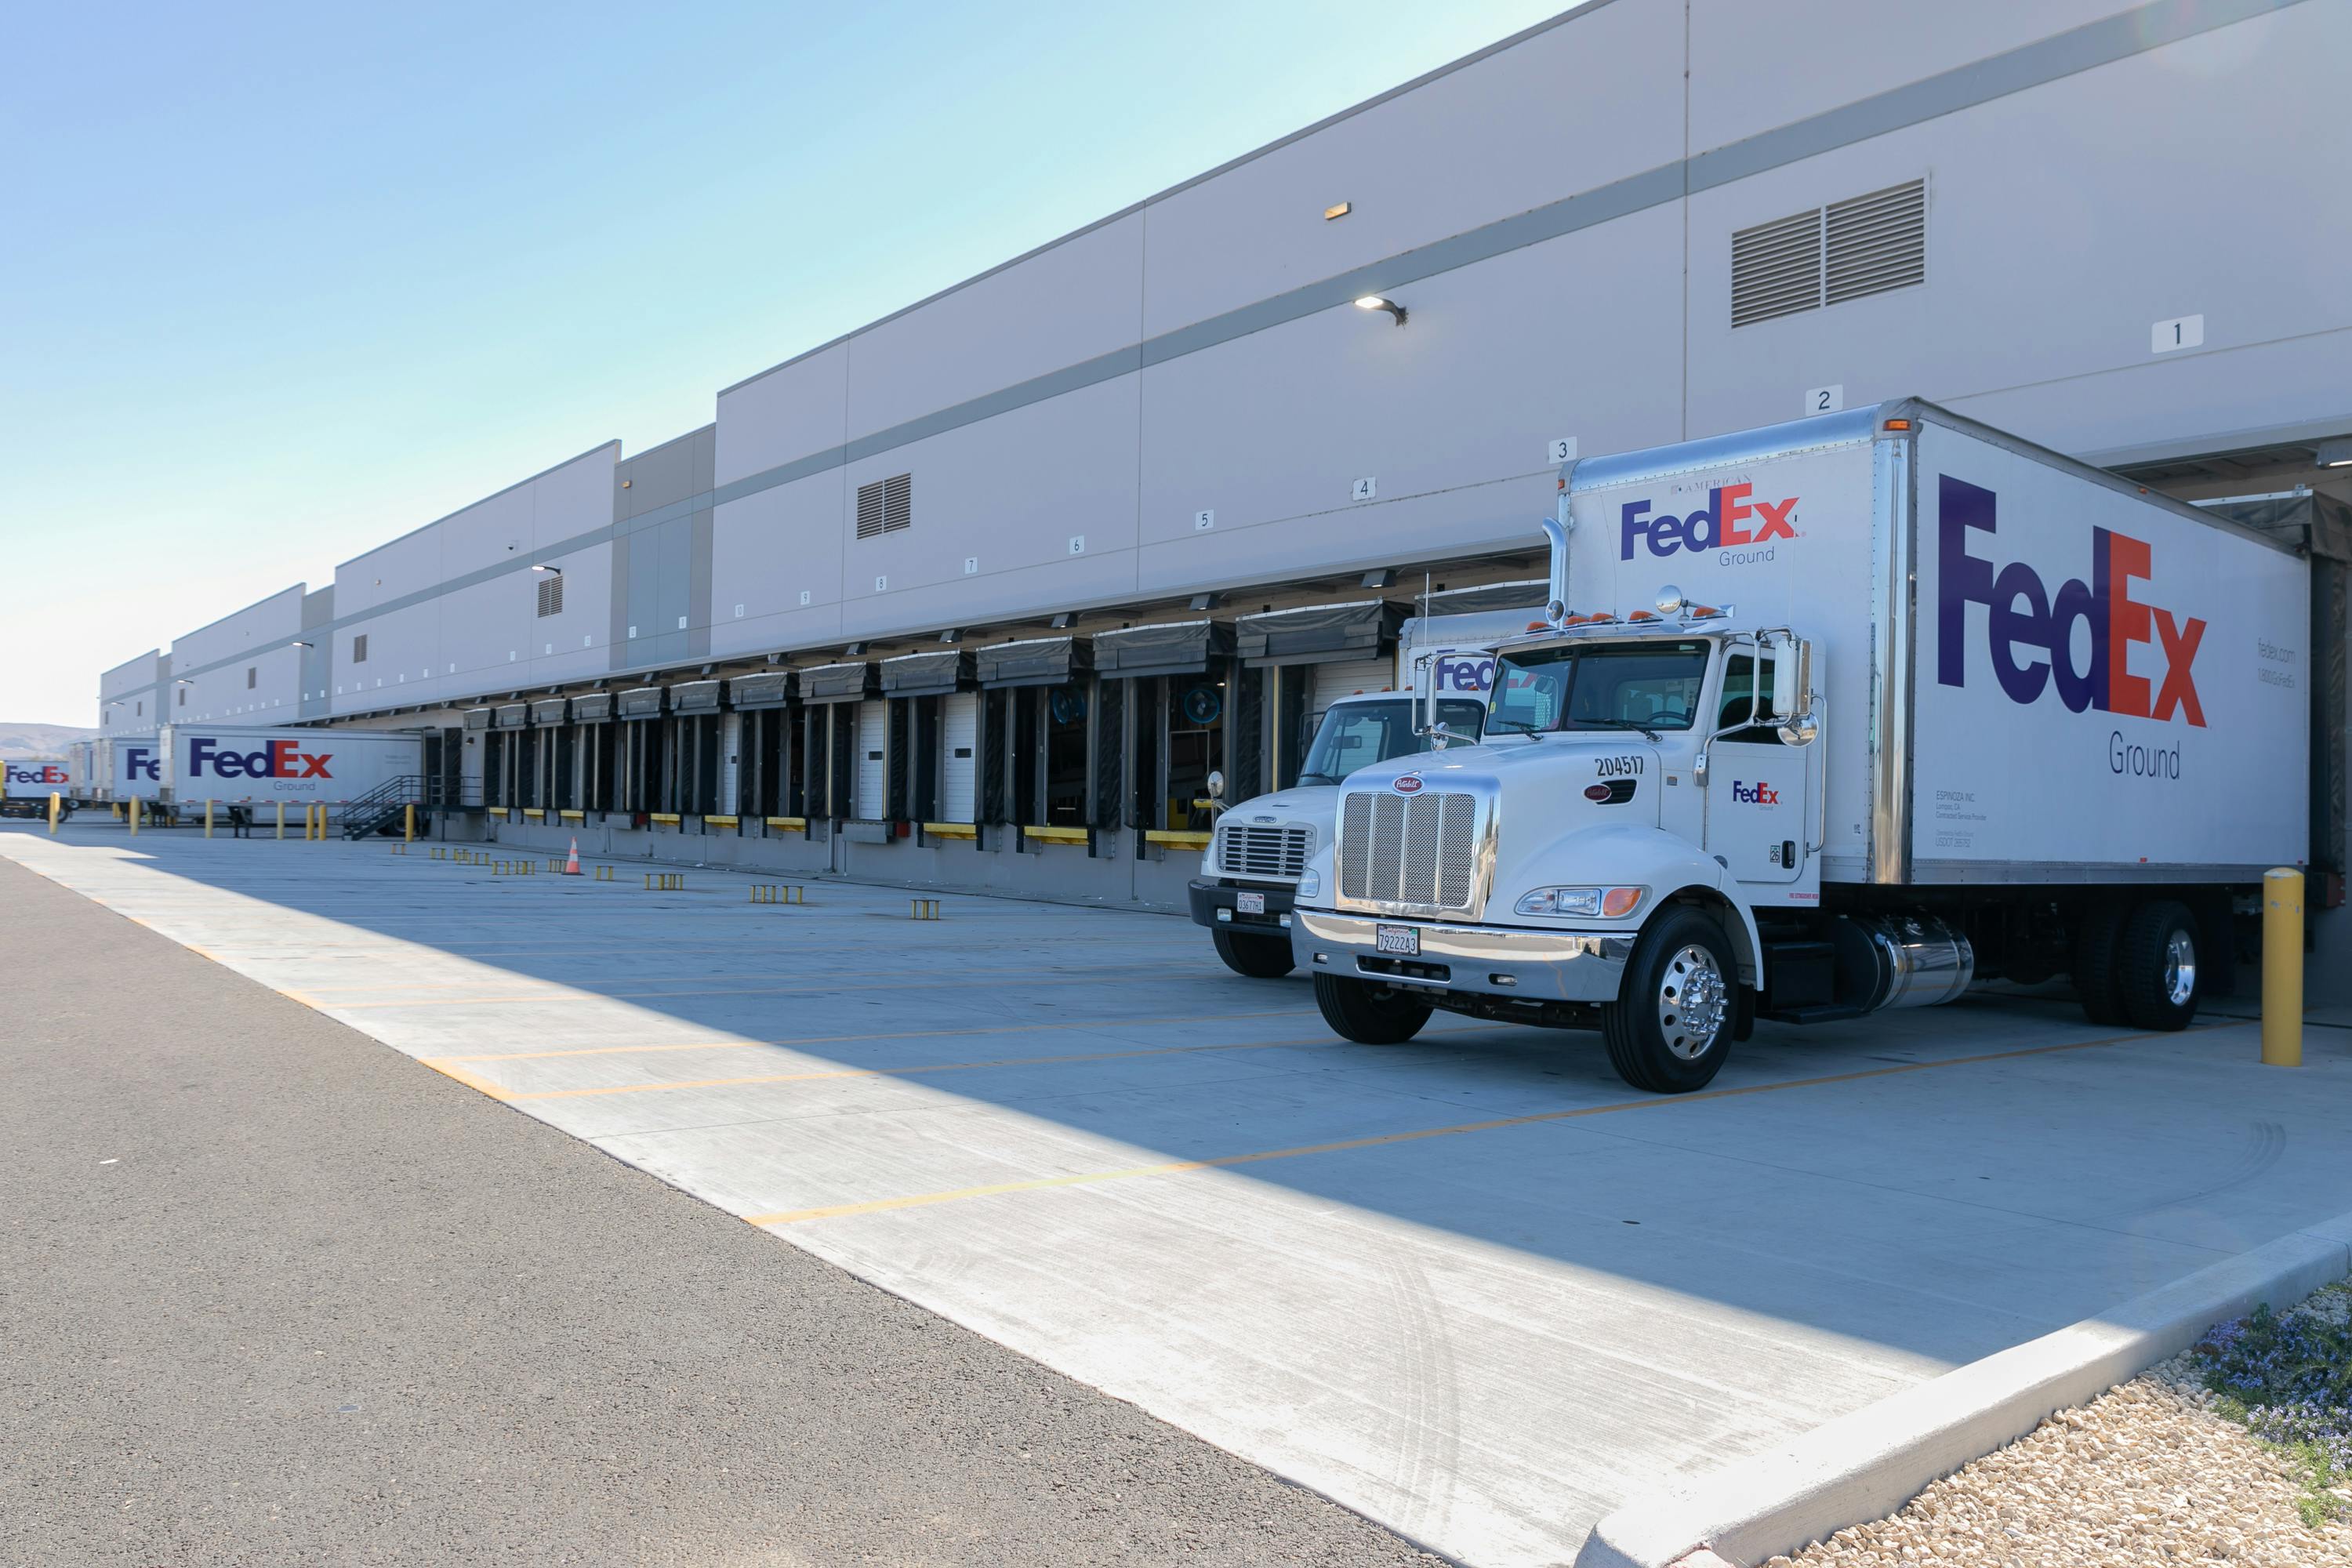 Large warehouse facility in Bakersfield, CA